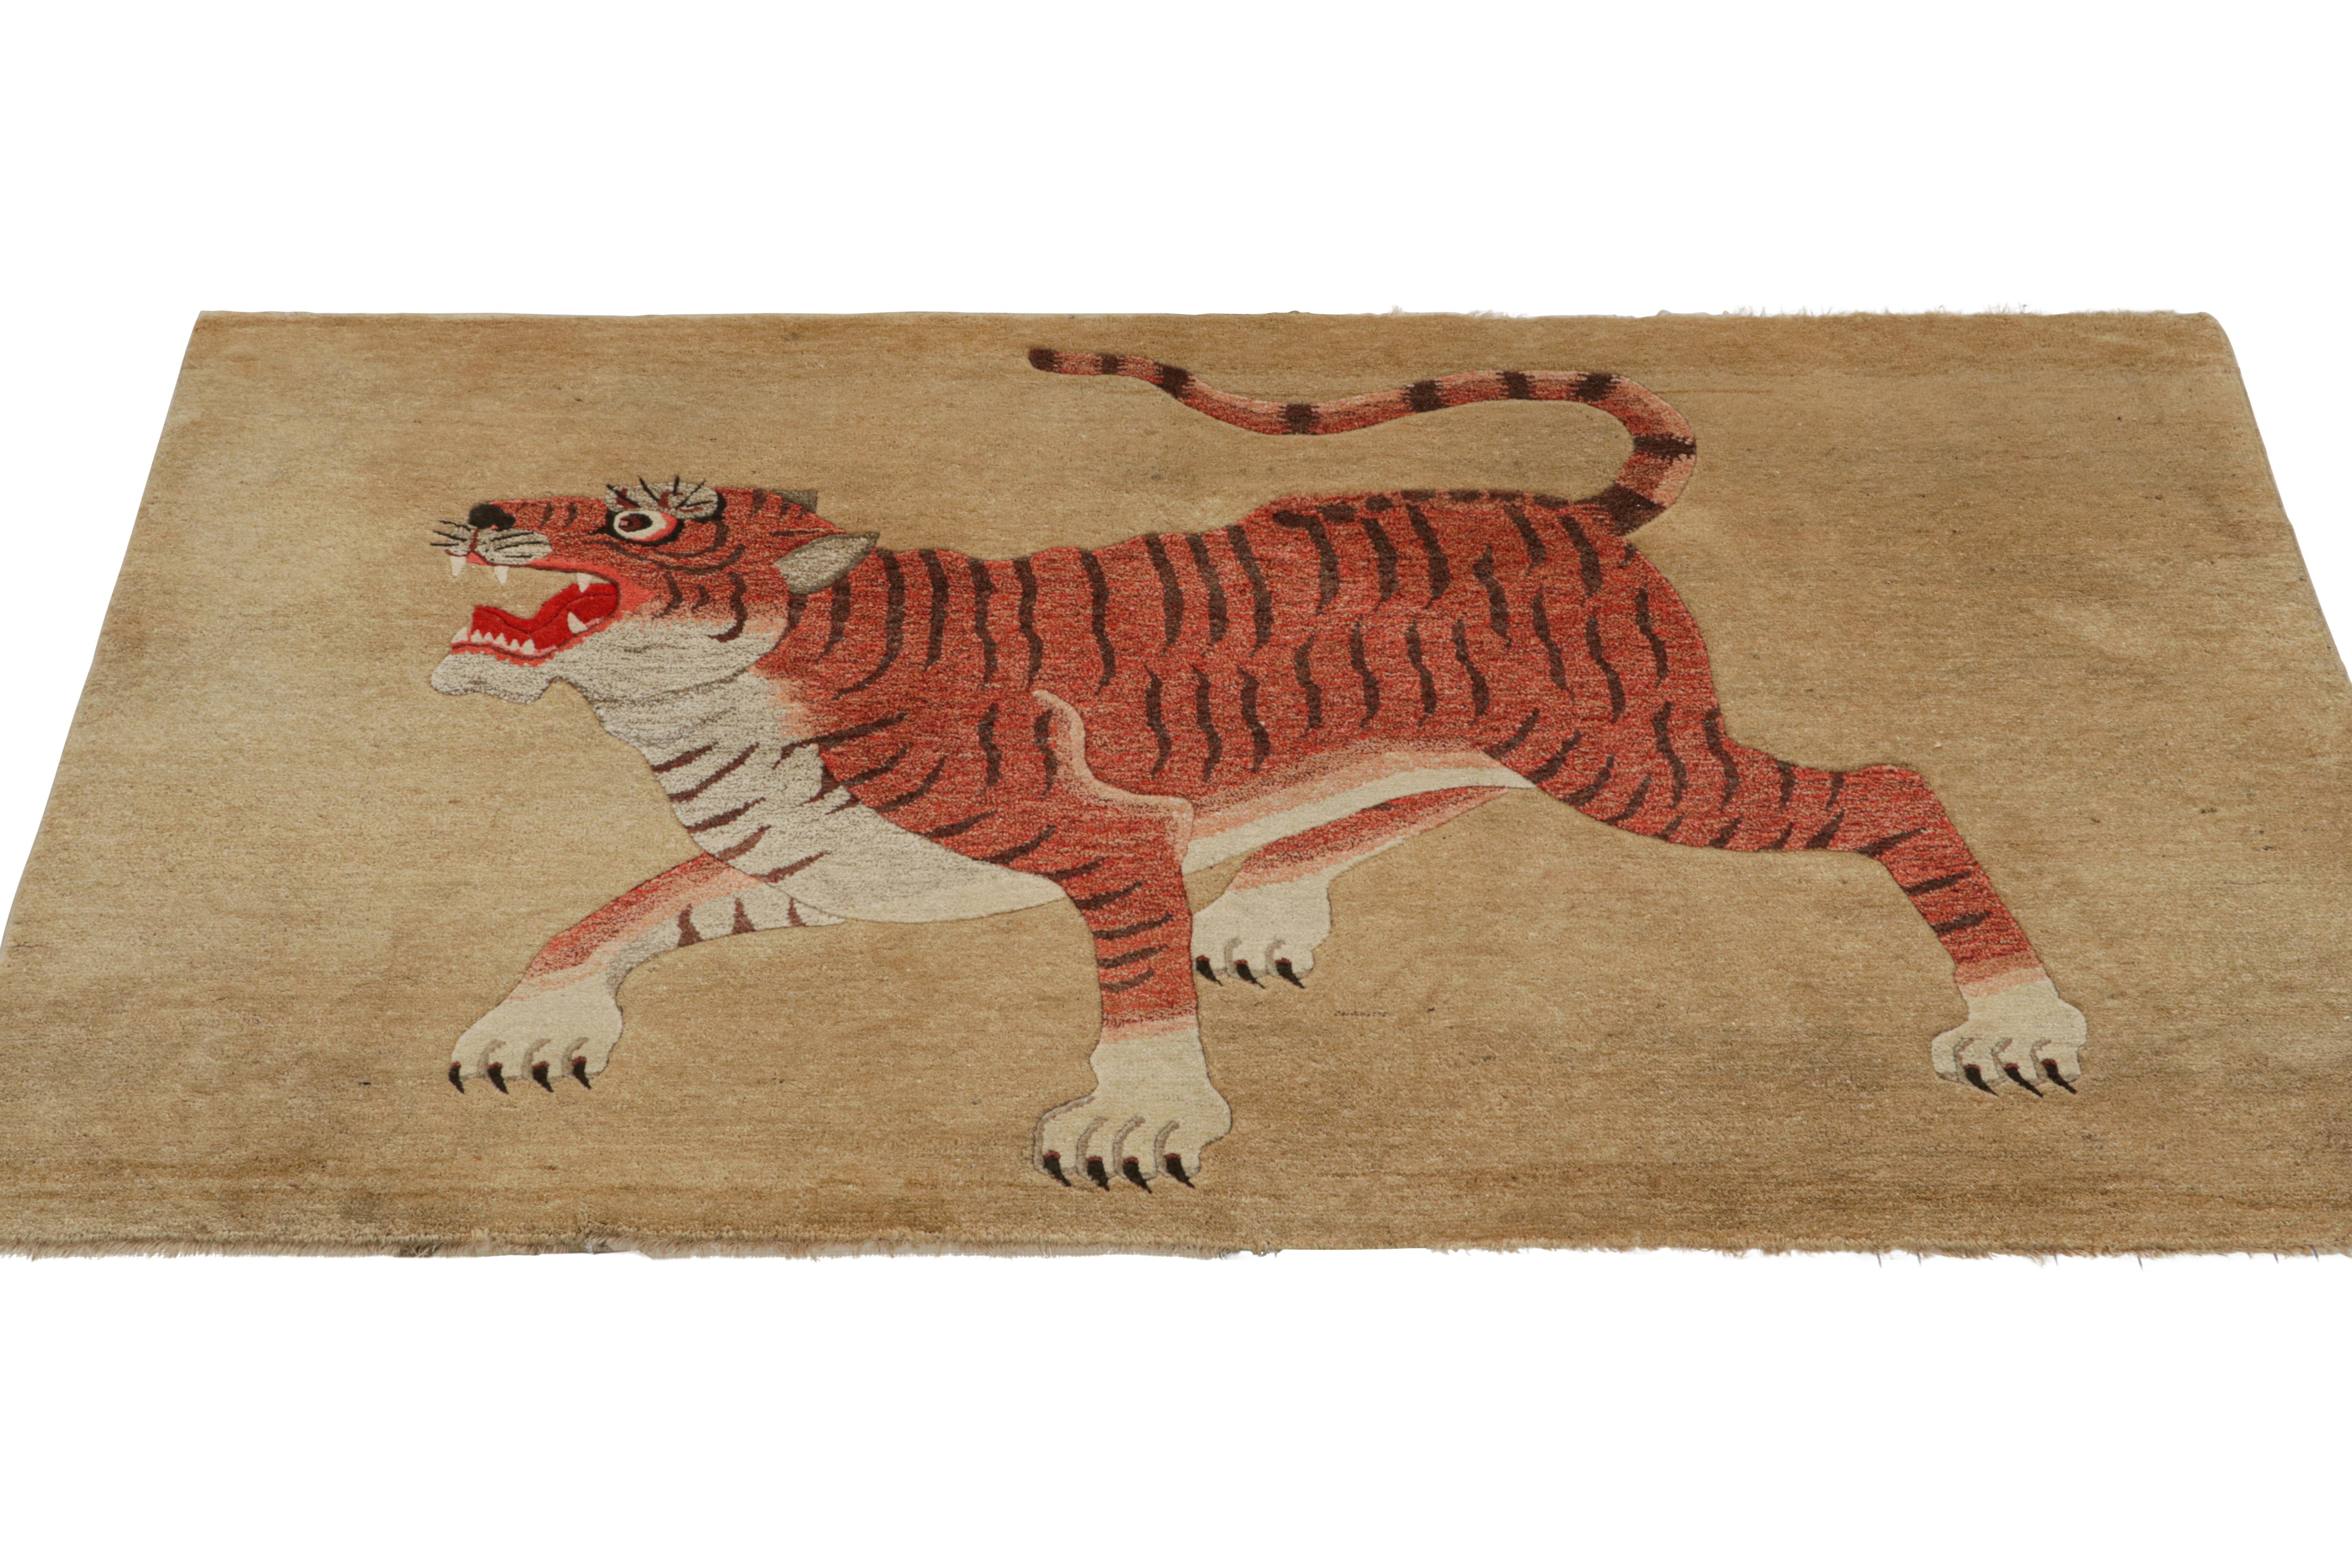 Hand-knotted in wool and originating from Germany circa 1920-1930, this 3x6 antique tiger runner rug is an exciting, rare new curation from the Rug & Kilim collection.

On the Design: 

Pictorial rugs are among some of the richest works of folk art